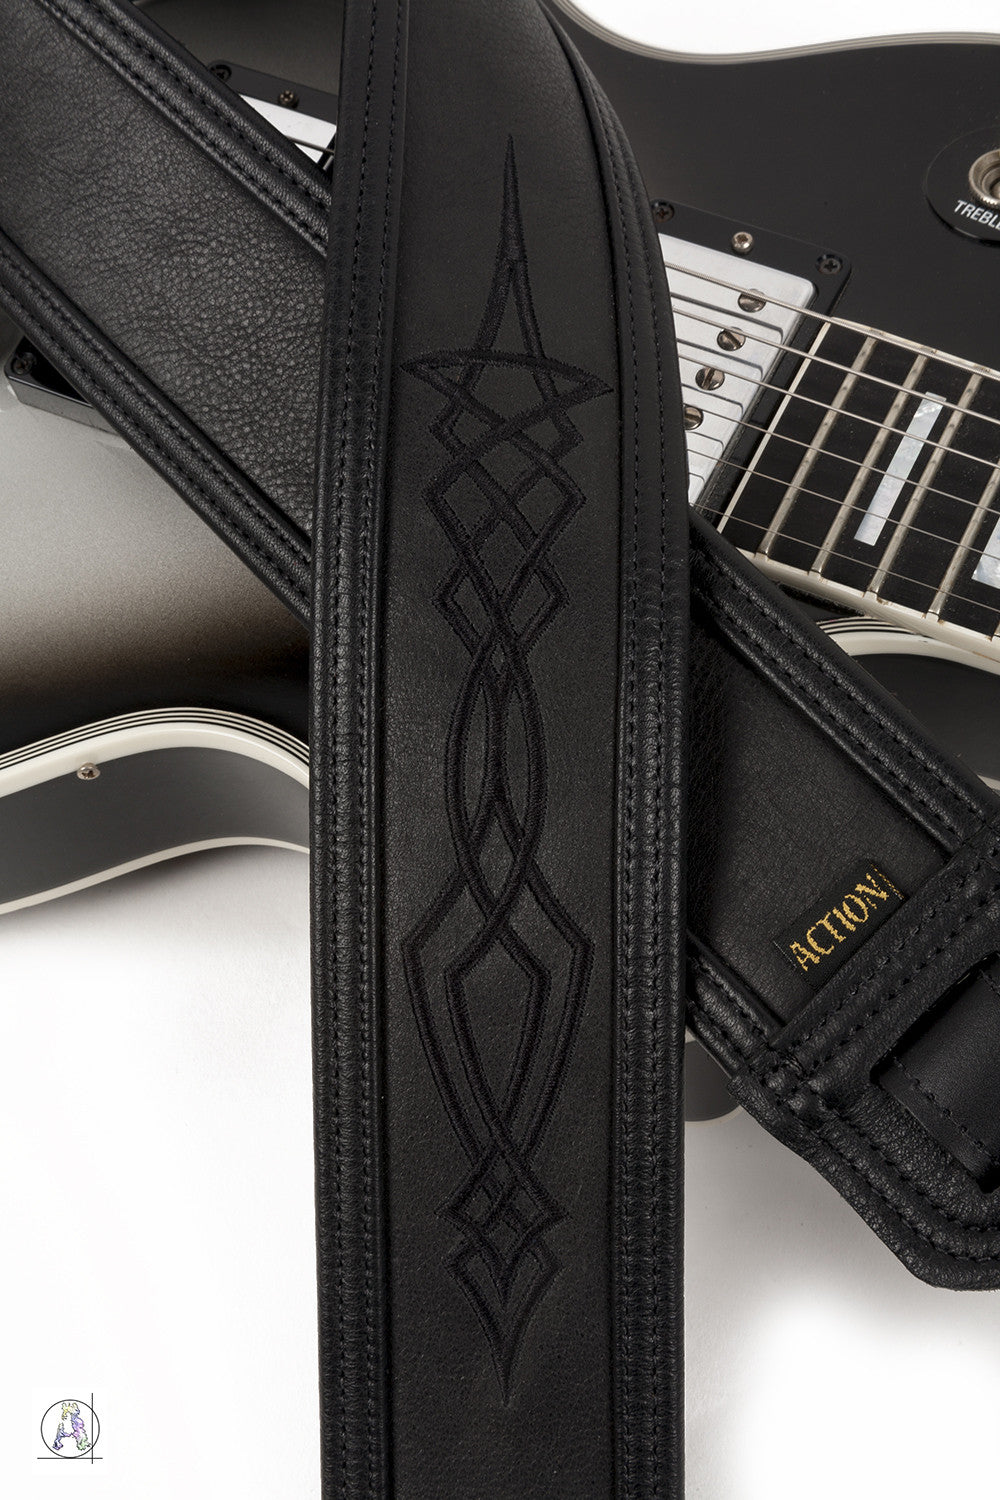 Stealth - Soft Black Leather Guitar Strap with Black Pinstriping